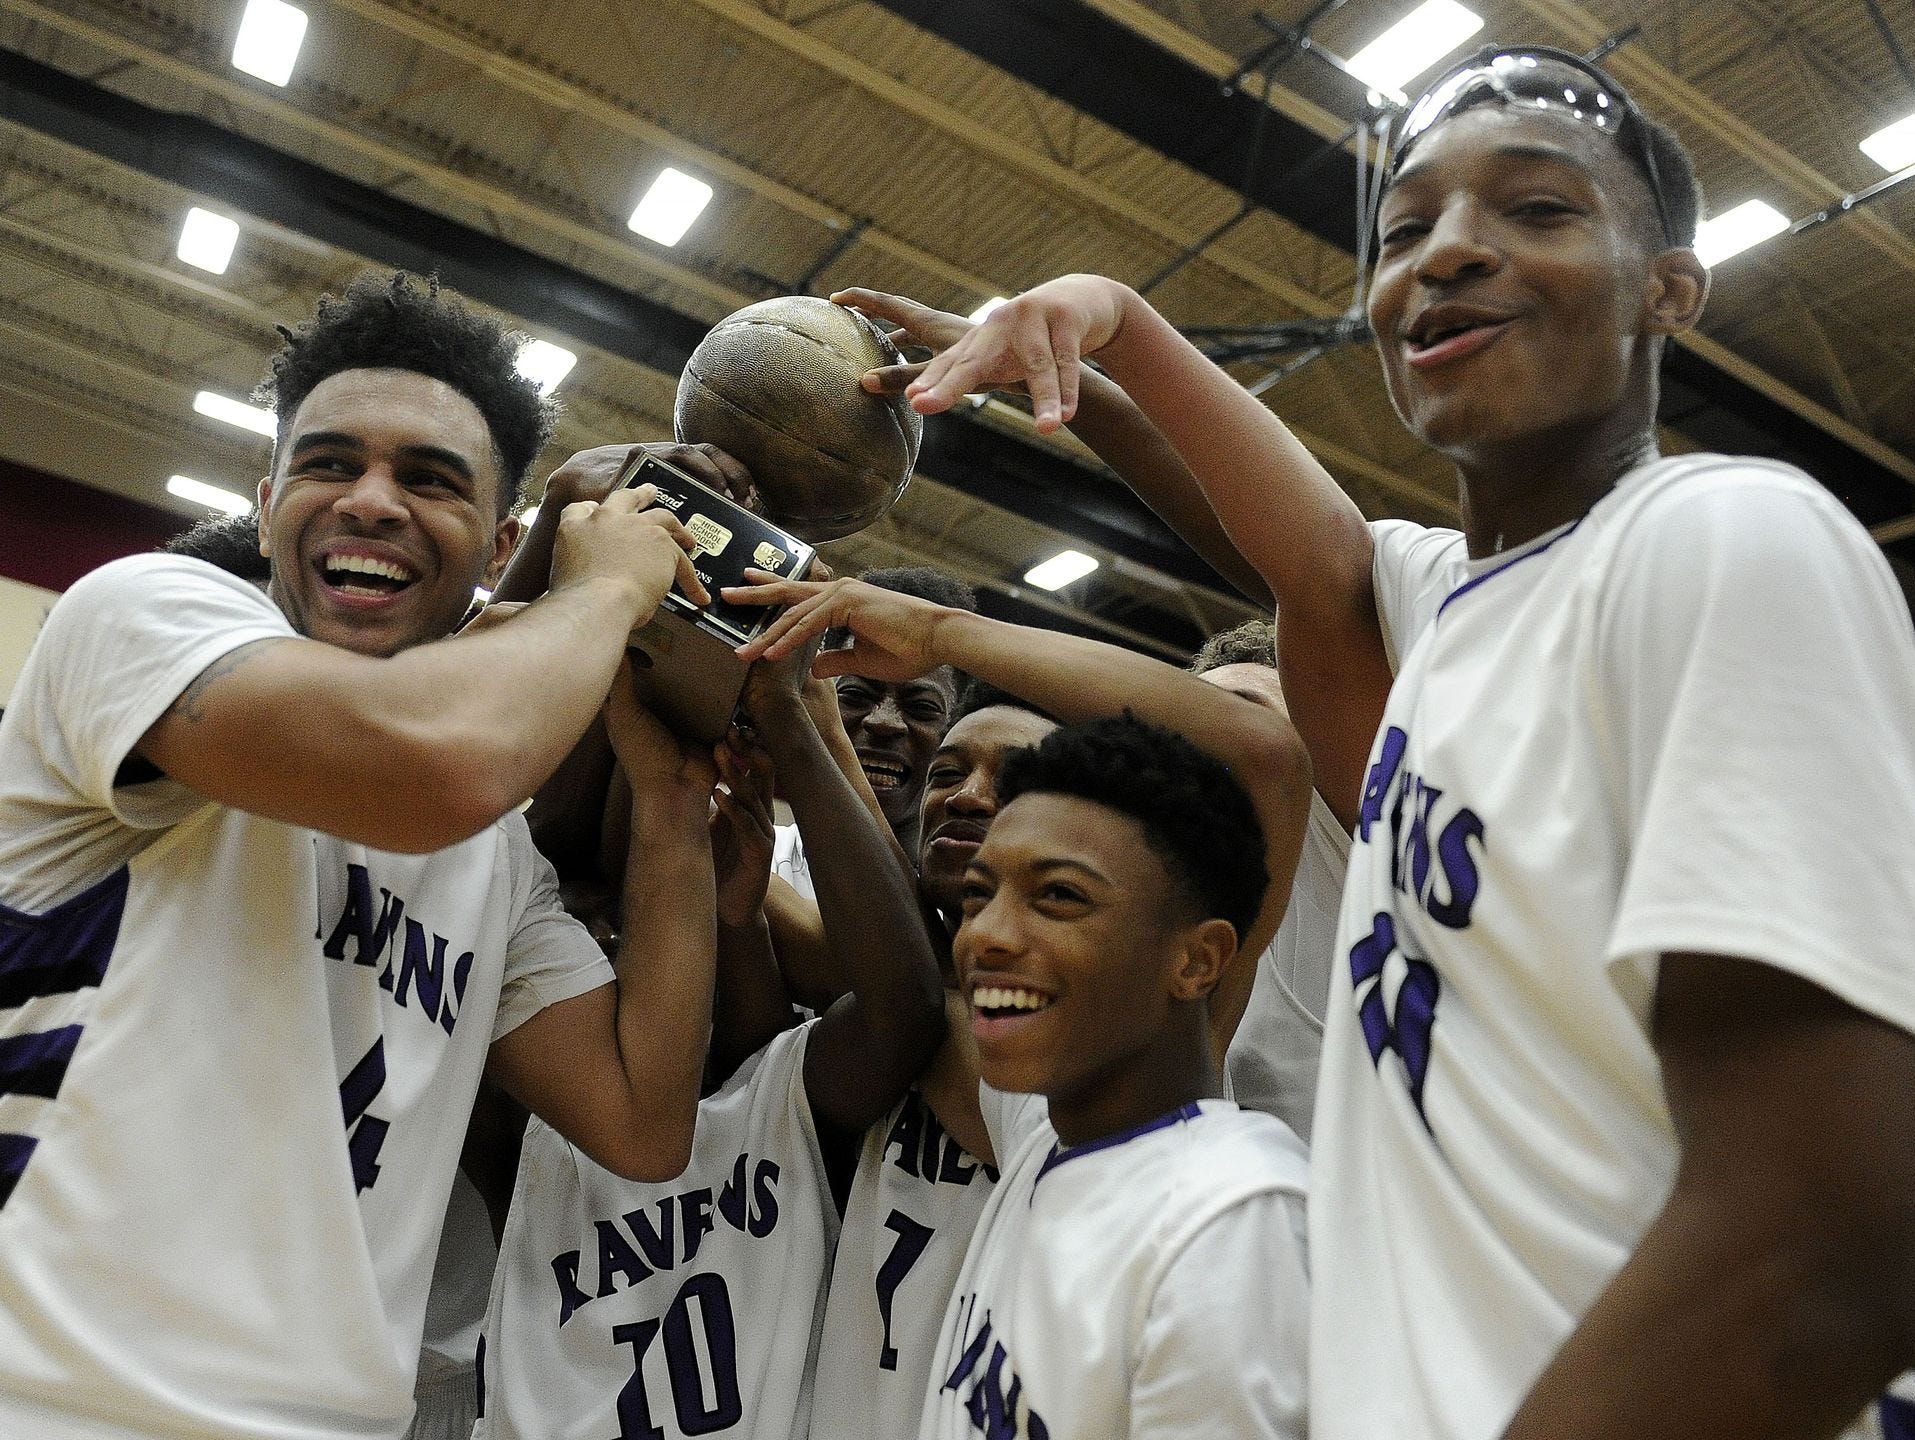 Cane Ridge players celebrate after the team's doubble-overtime win over Hillsboro on Friday.